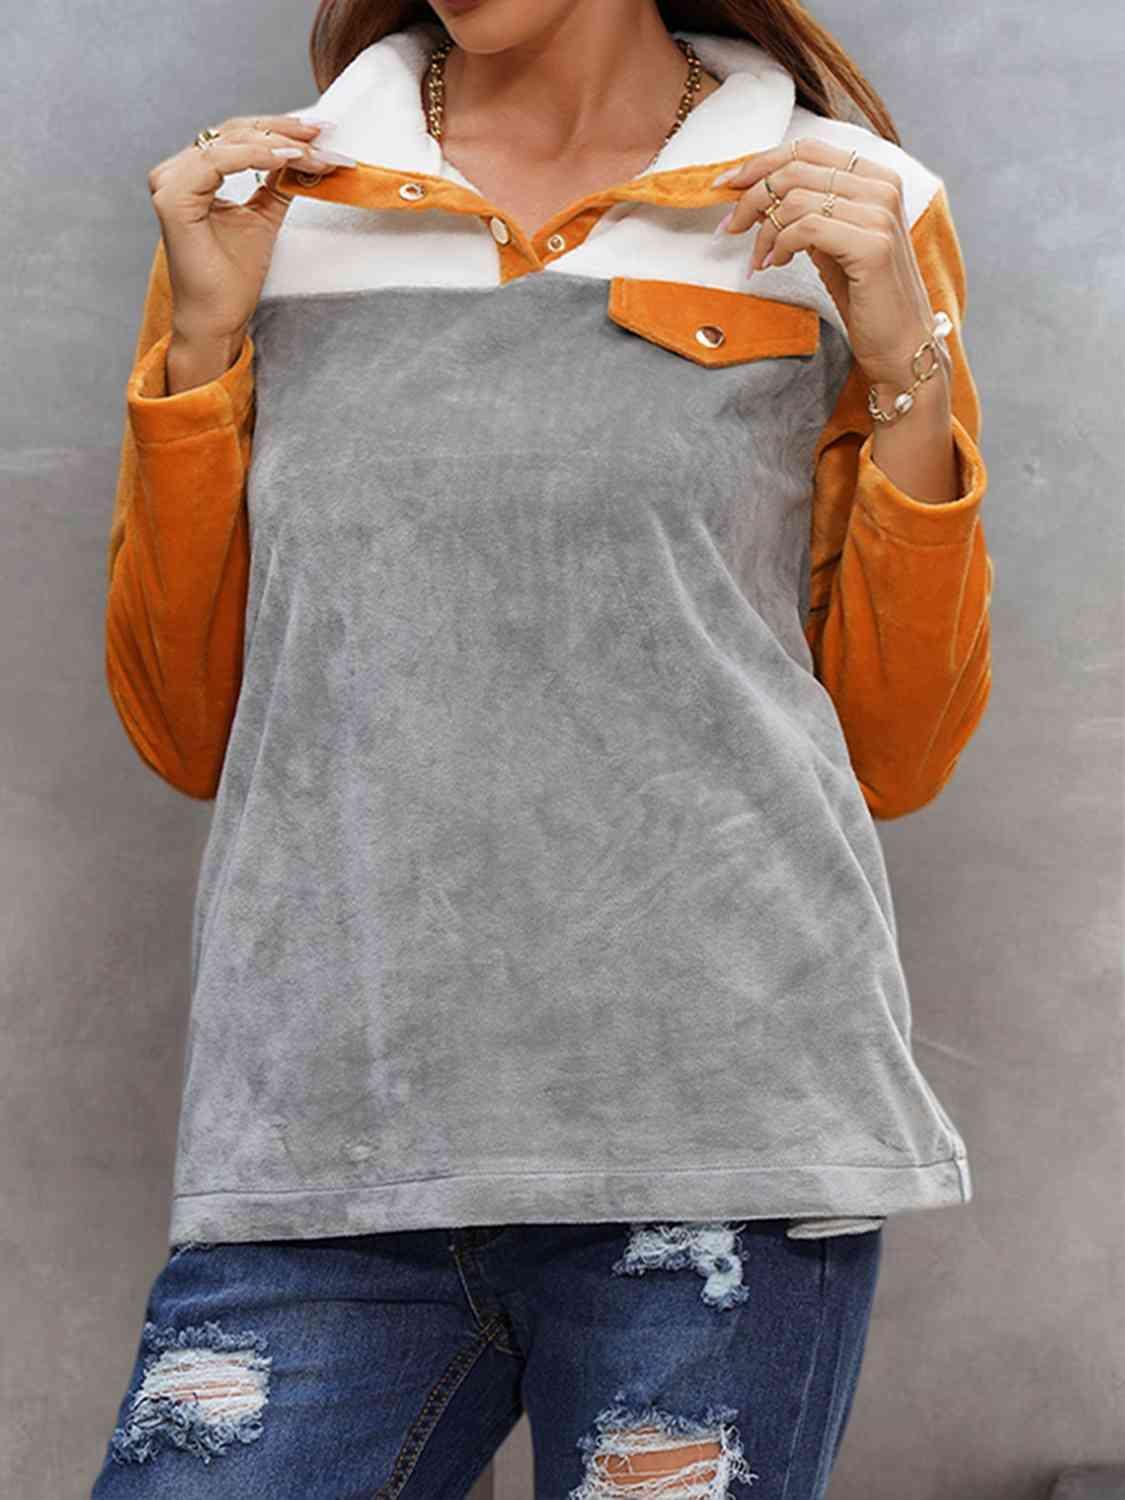 a woman wearing a grey and orange top